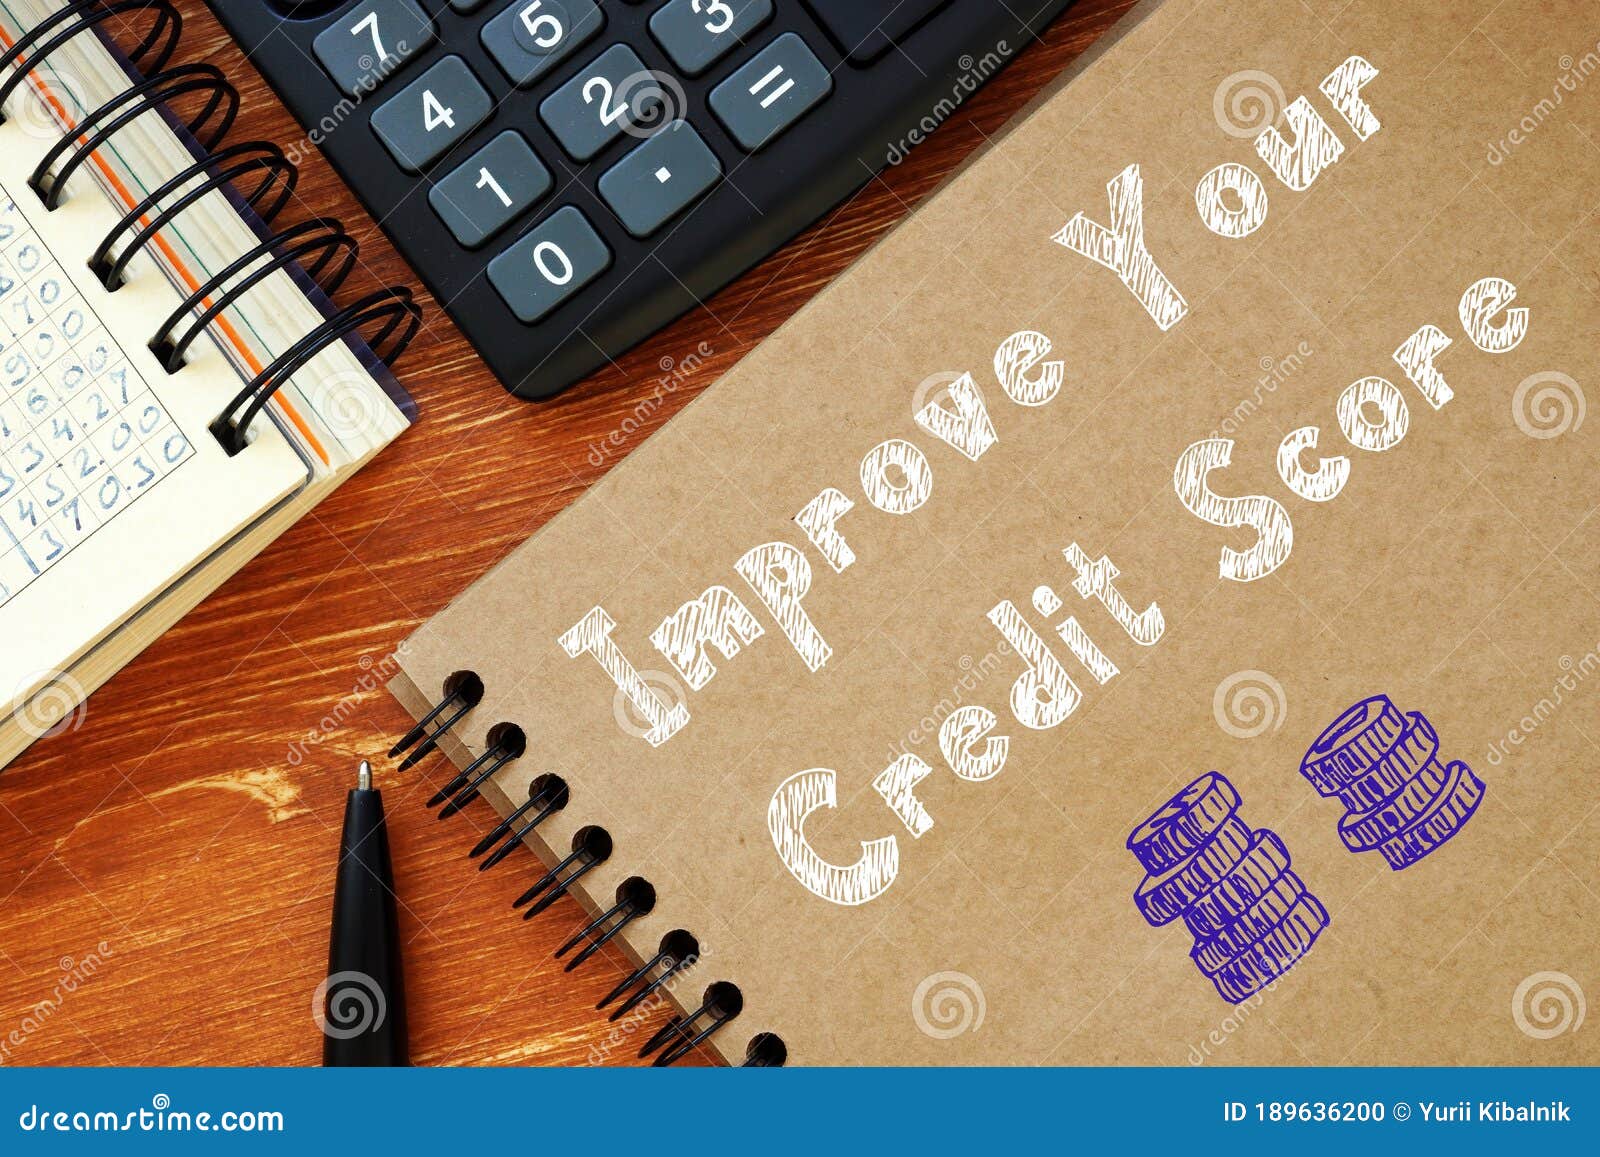 business concept about improve your credit score with inscription on the sheet